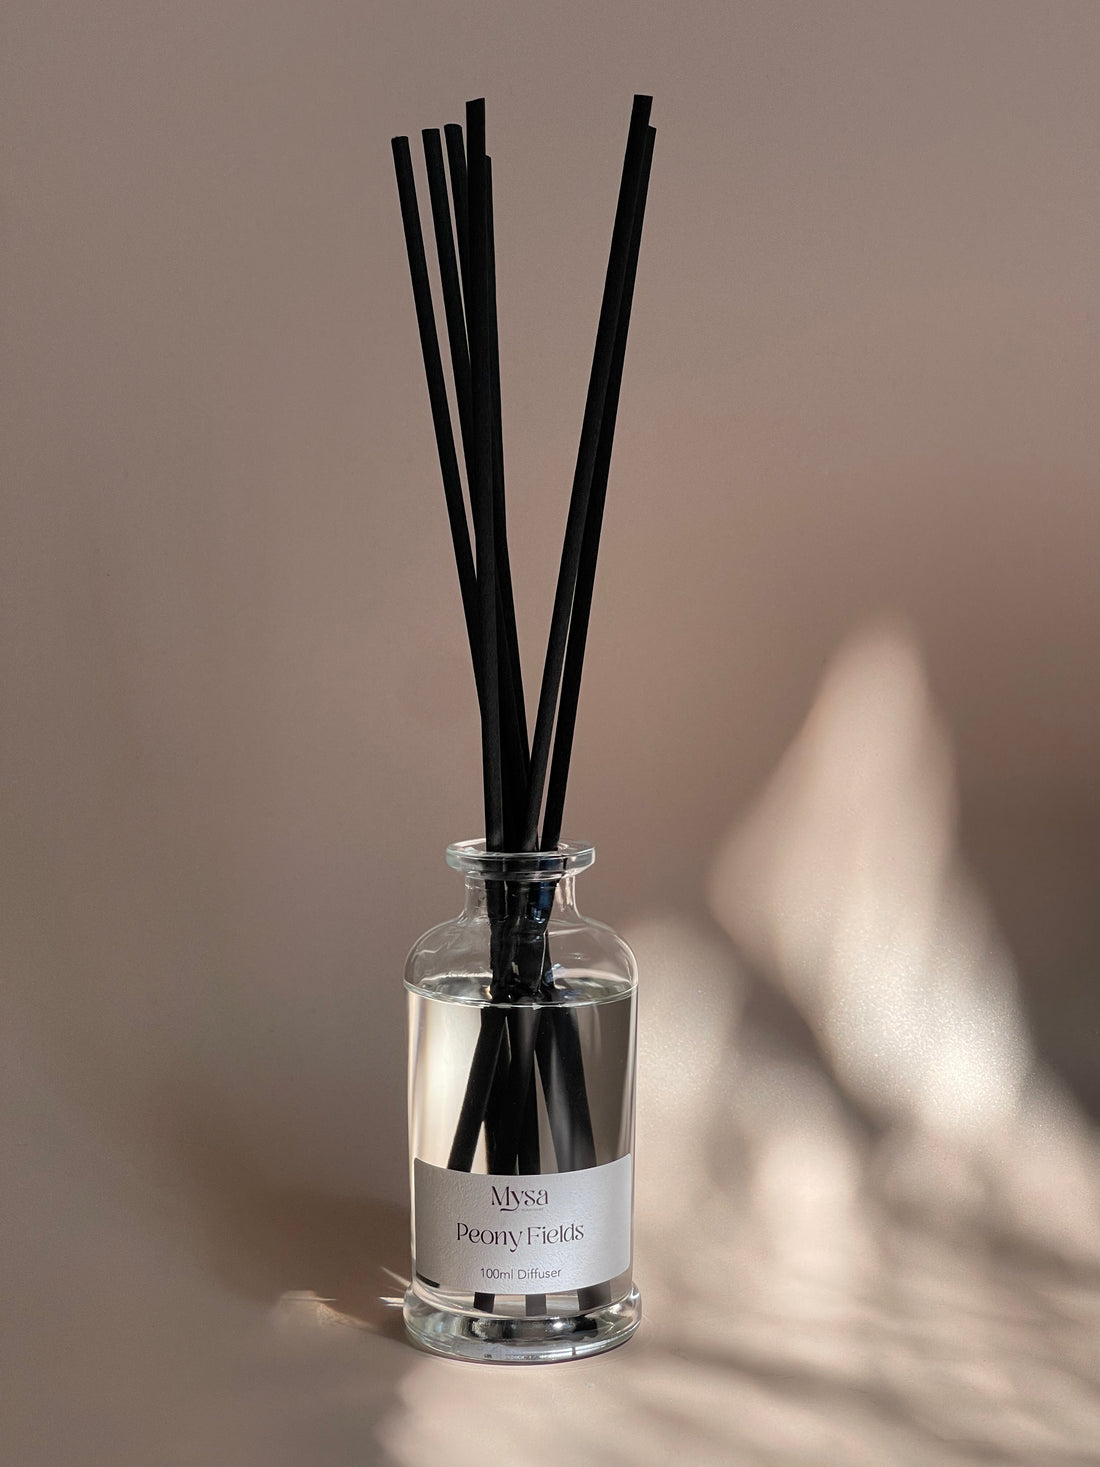 Peony Fields luxury reed diffuser in gift box, featuring a vegan base oil infused with Velvet Peony &amp; Oud fragrance.